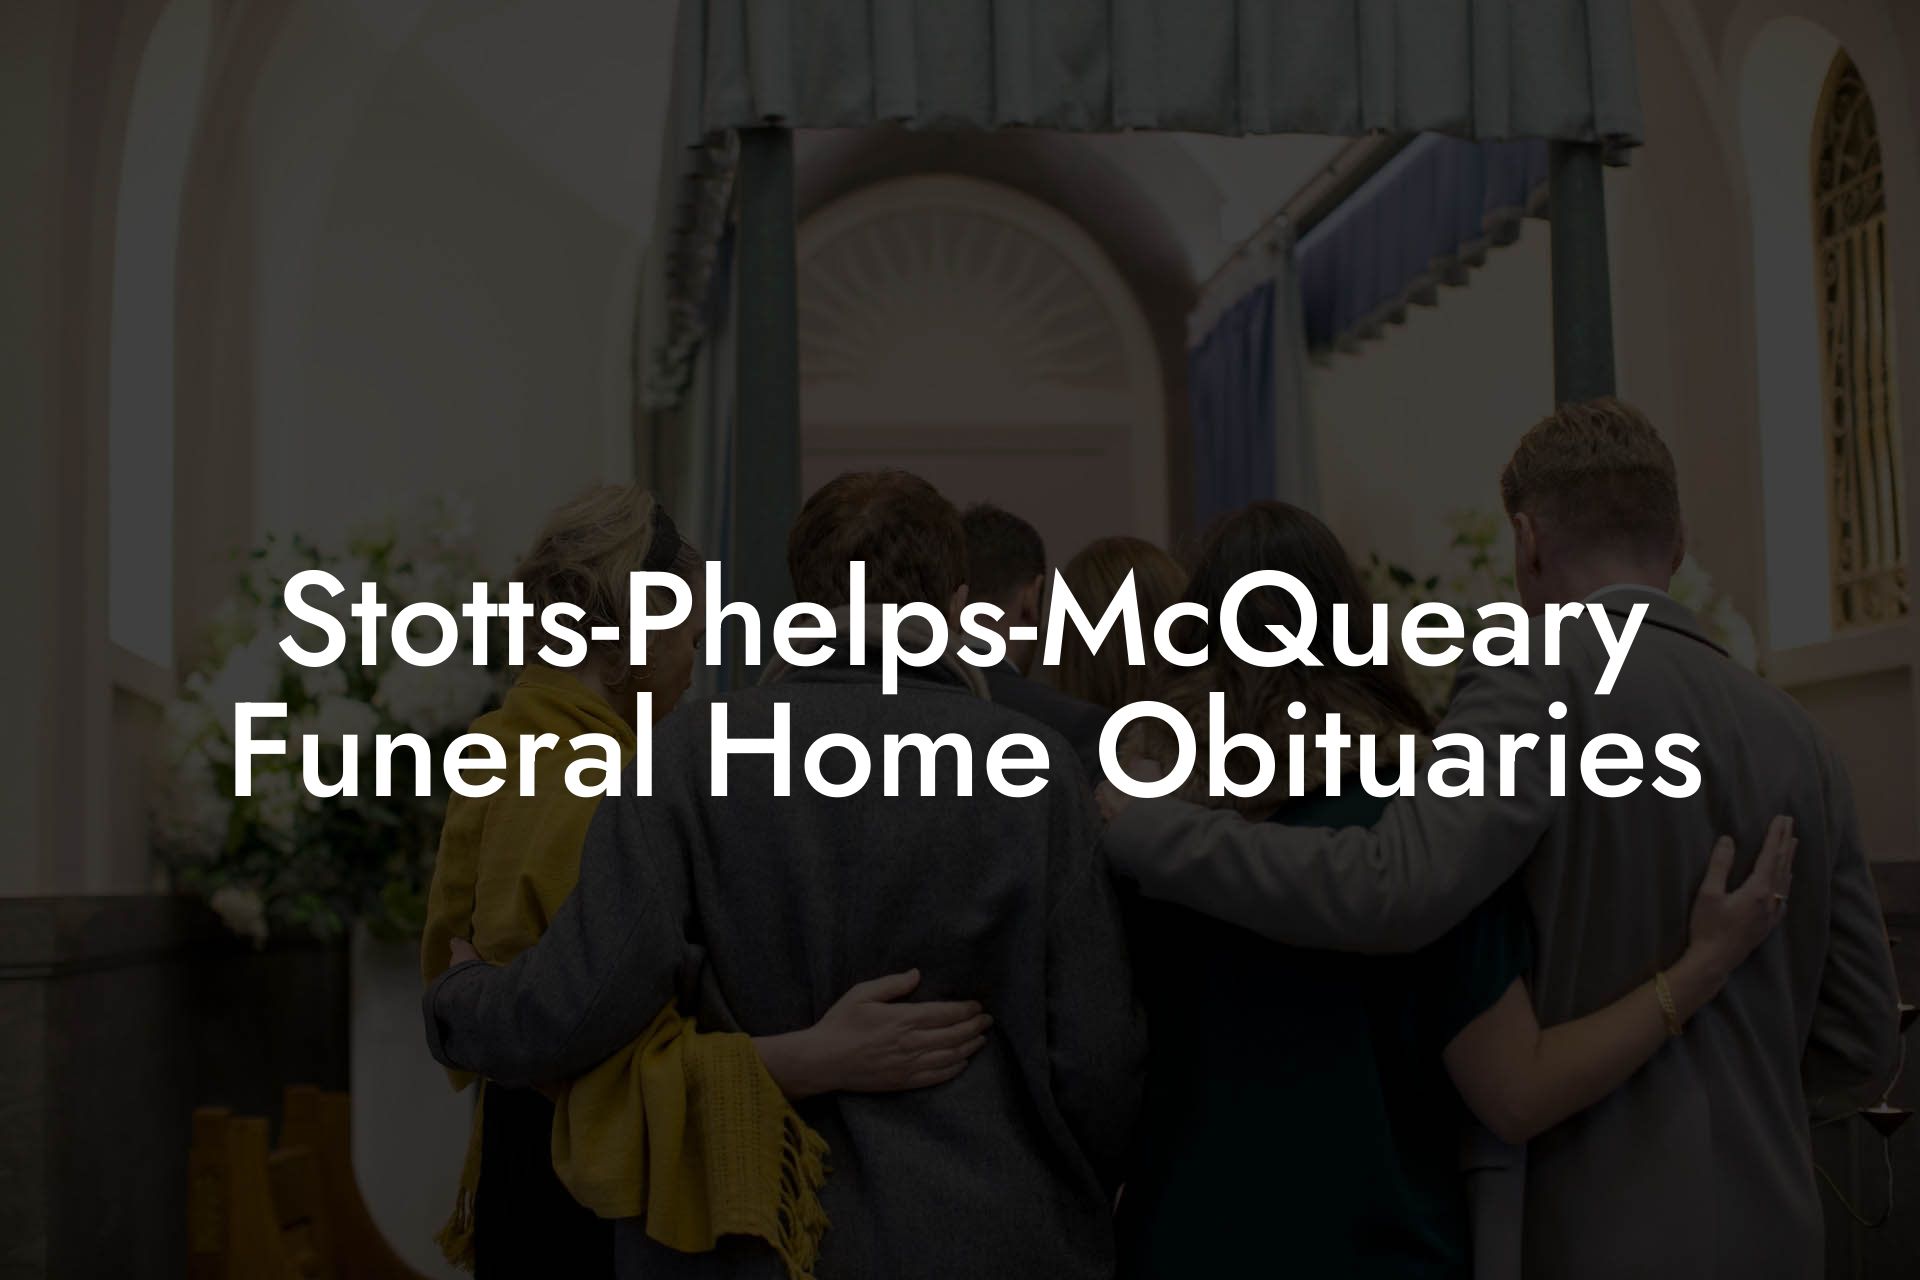 Stotts-Phelps-McQueary Funeral Home Obituaries